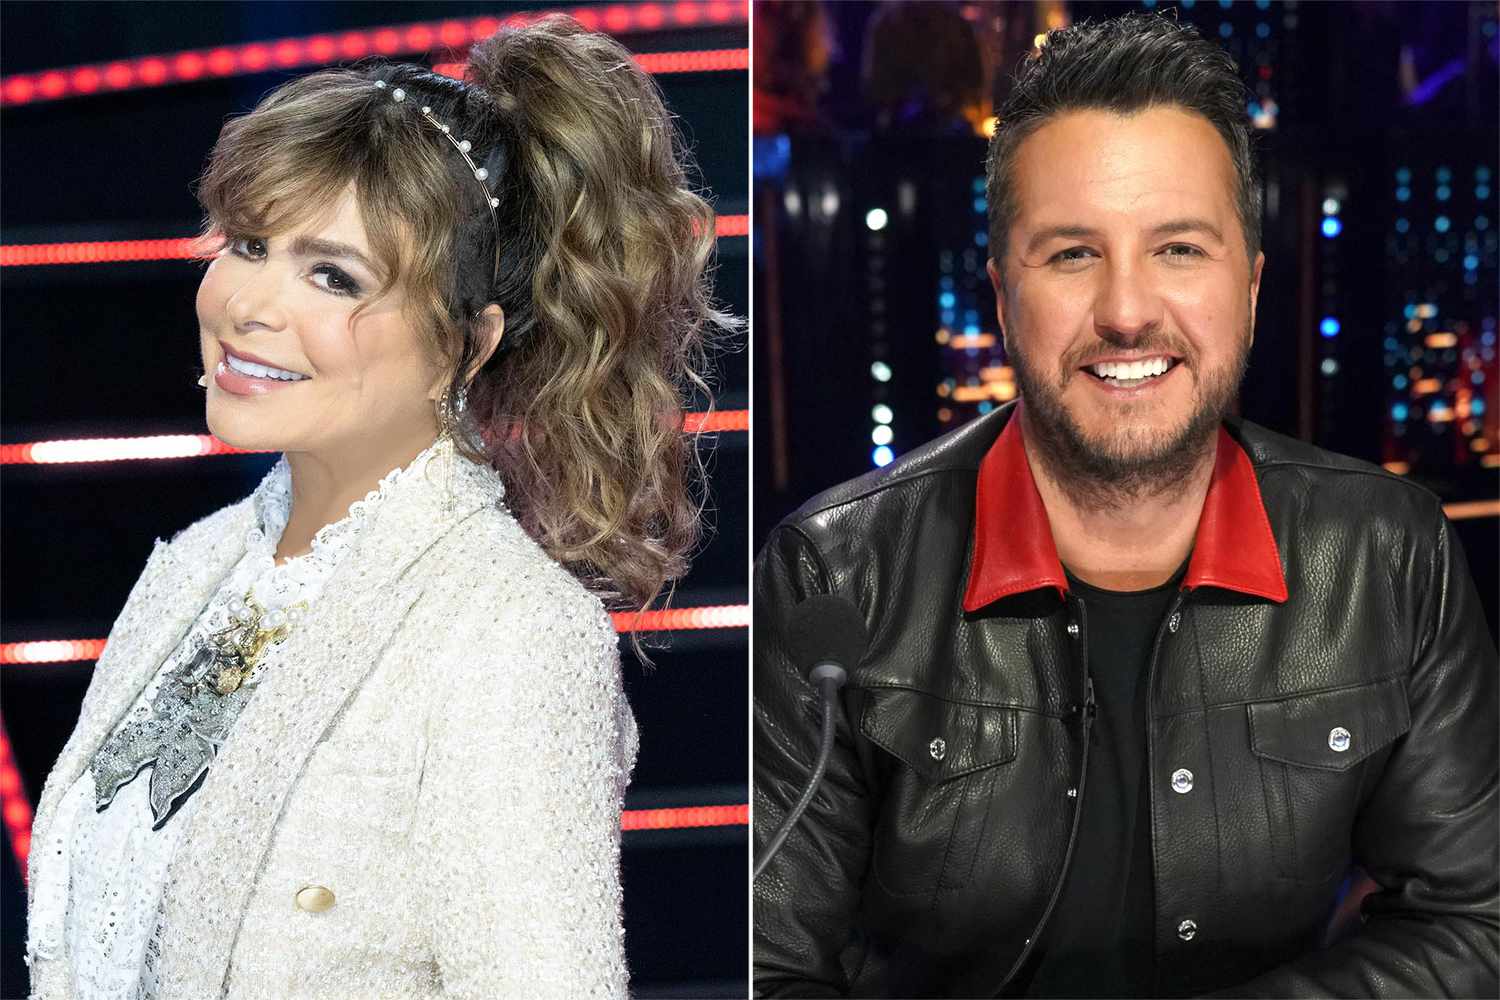 Paula Abdul returning to American Idol as guest judge while Luke Bryan recovers from COVID